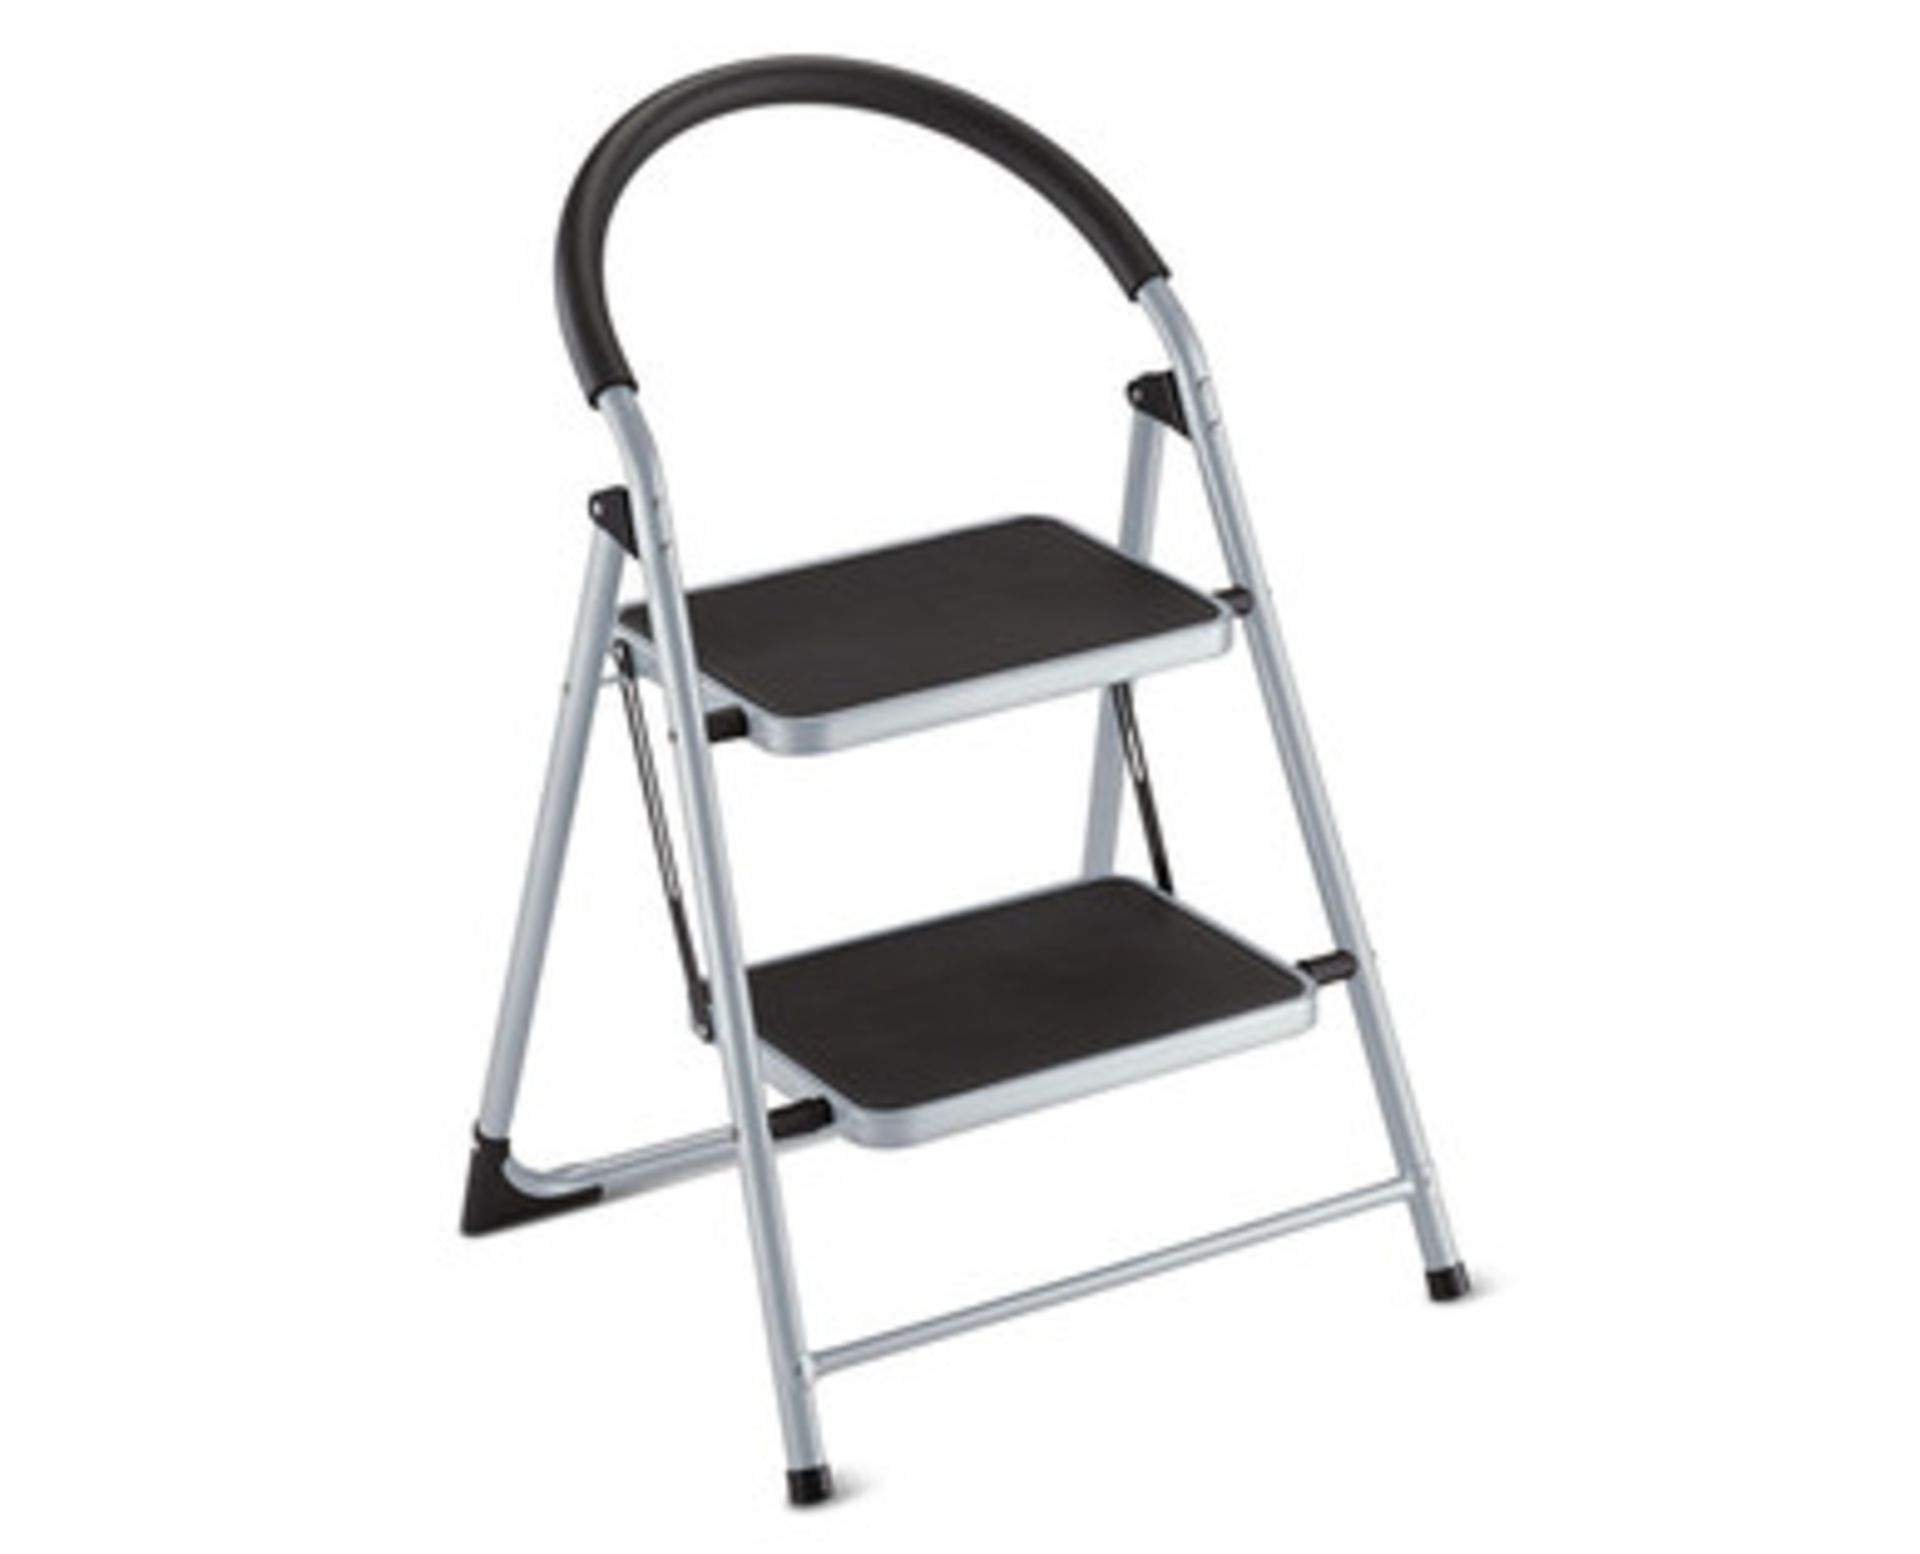 V Brand New Work Zone Two Step Stool Ladder (Pick up only will ship at buyers risk)